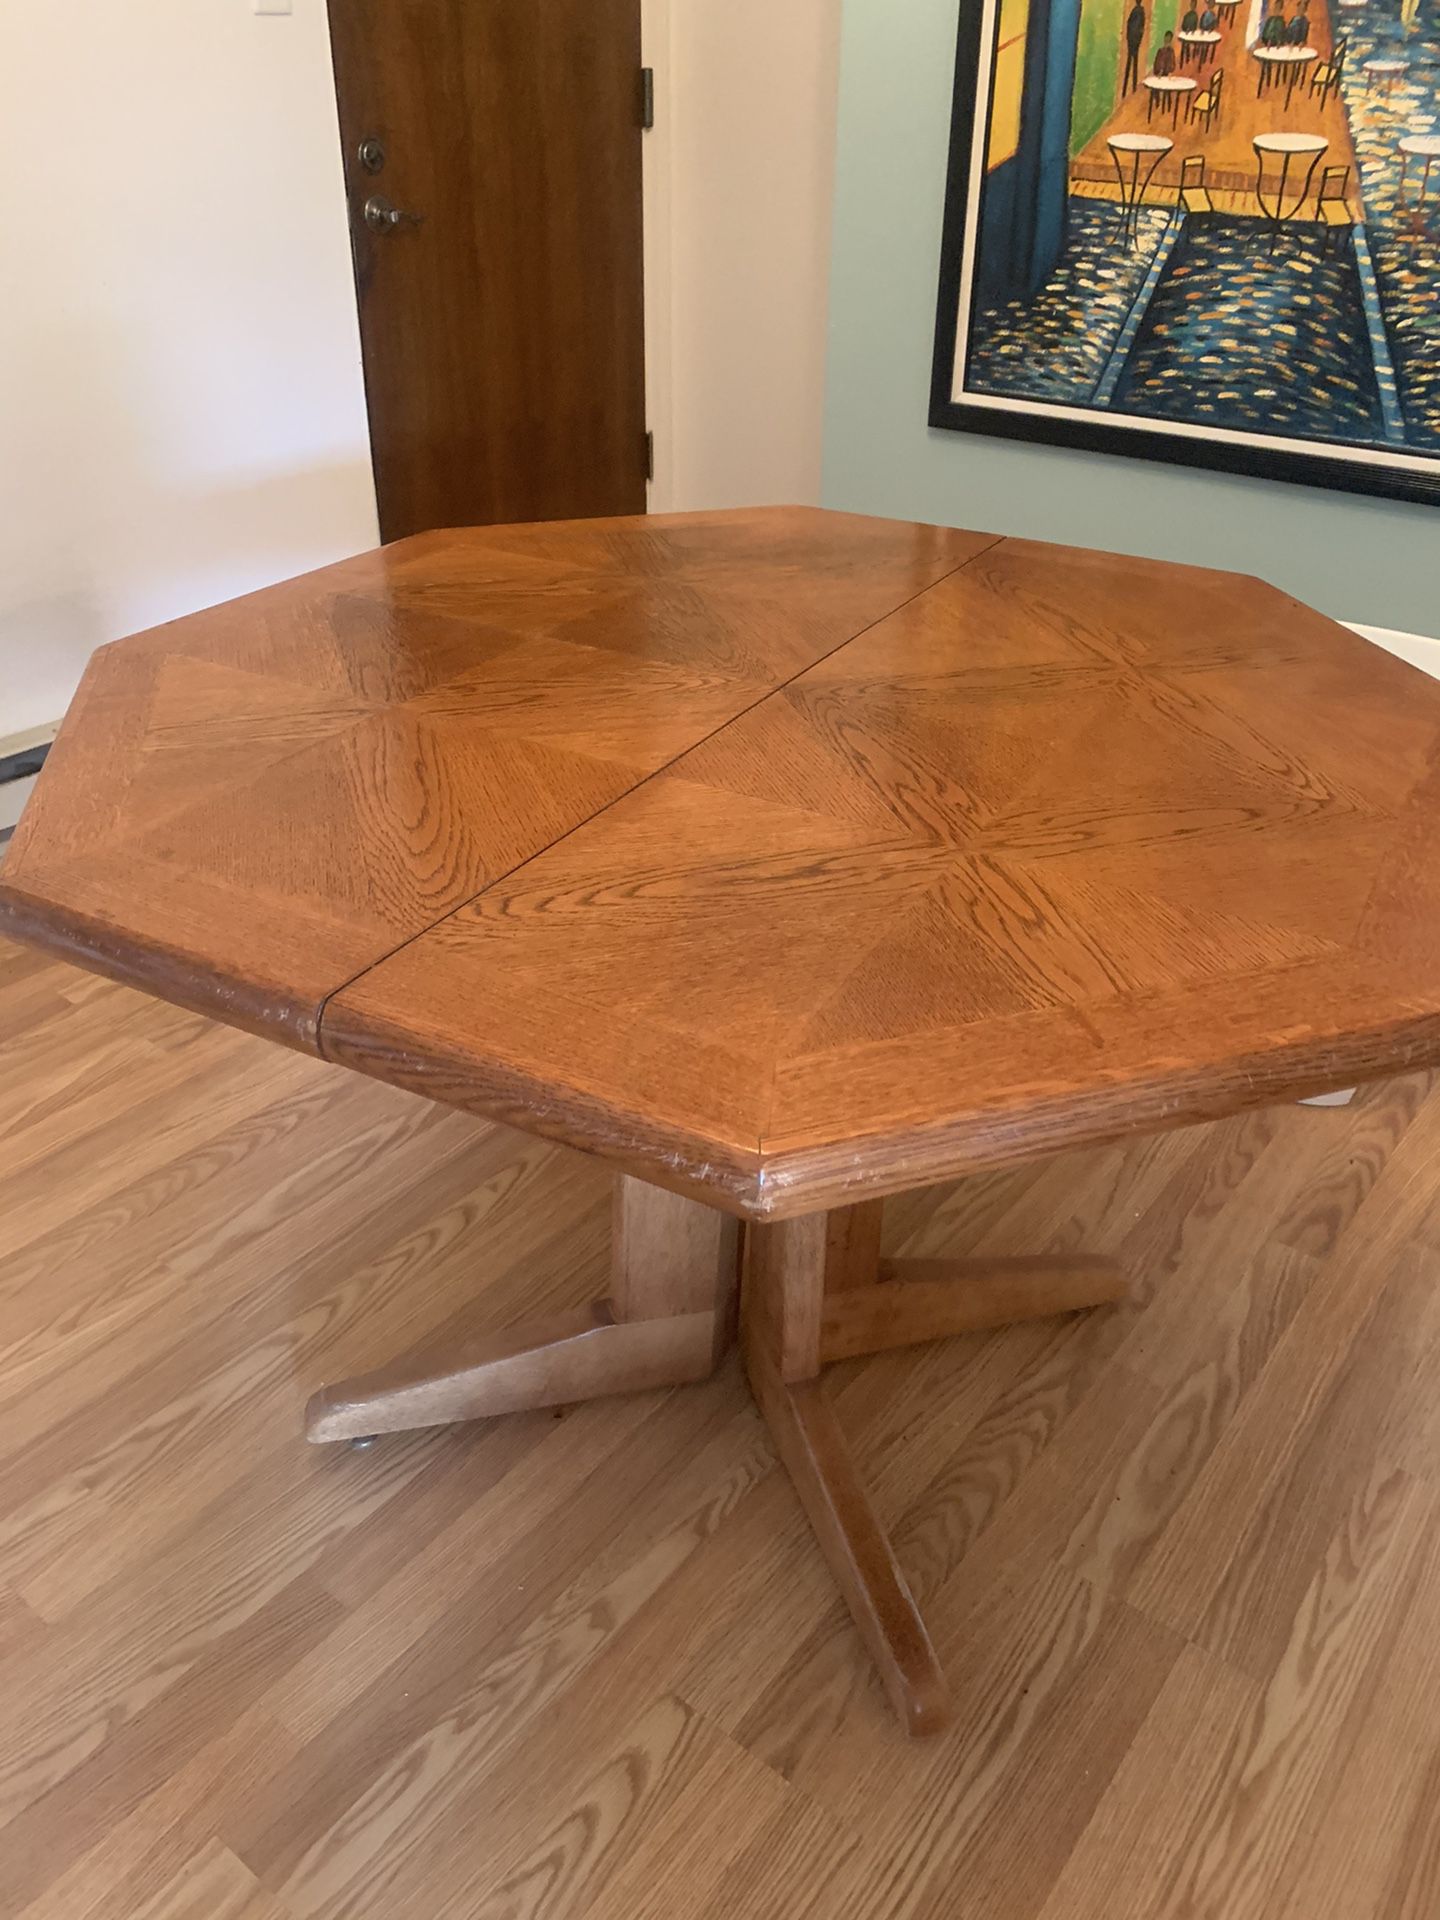 Wooden octagon table